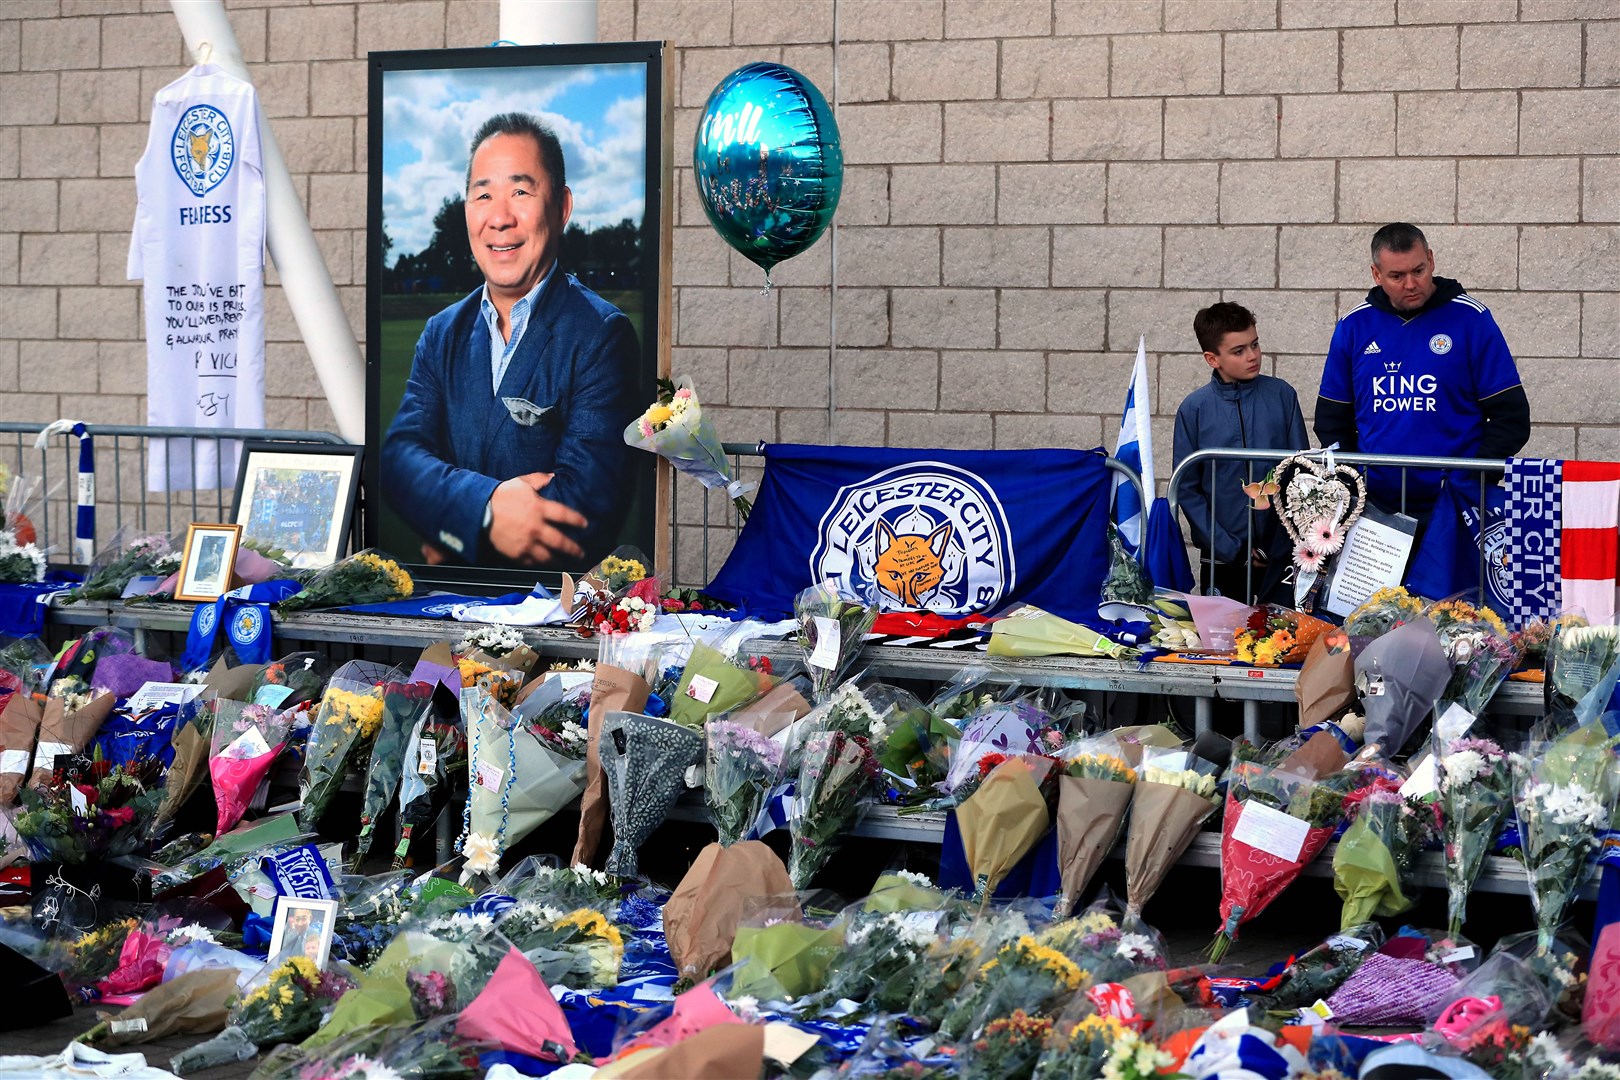 Tributes paid at Leicester City Football Club after chairman Vichai Srivaddhanaprabha and others died in a helicopter crash in 2018 (Mike Egerton)